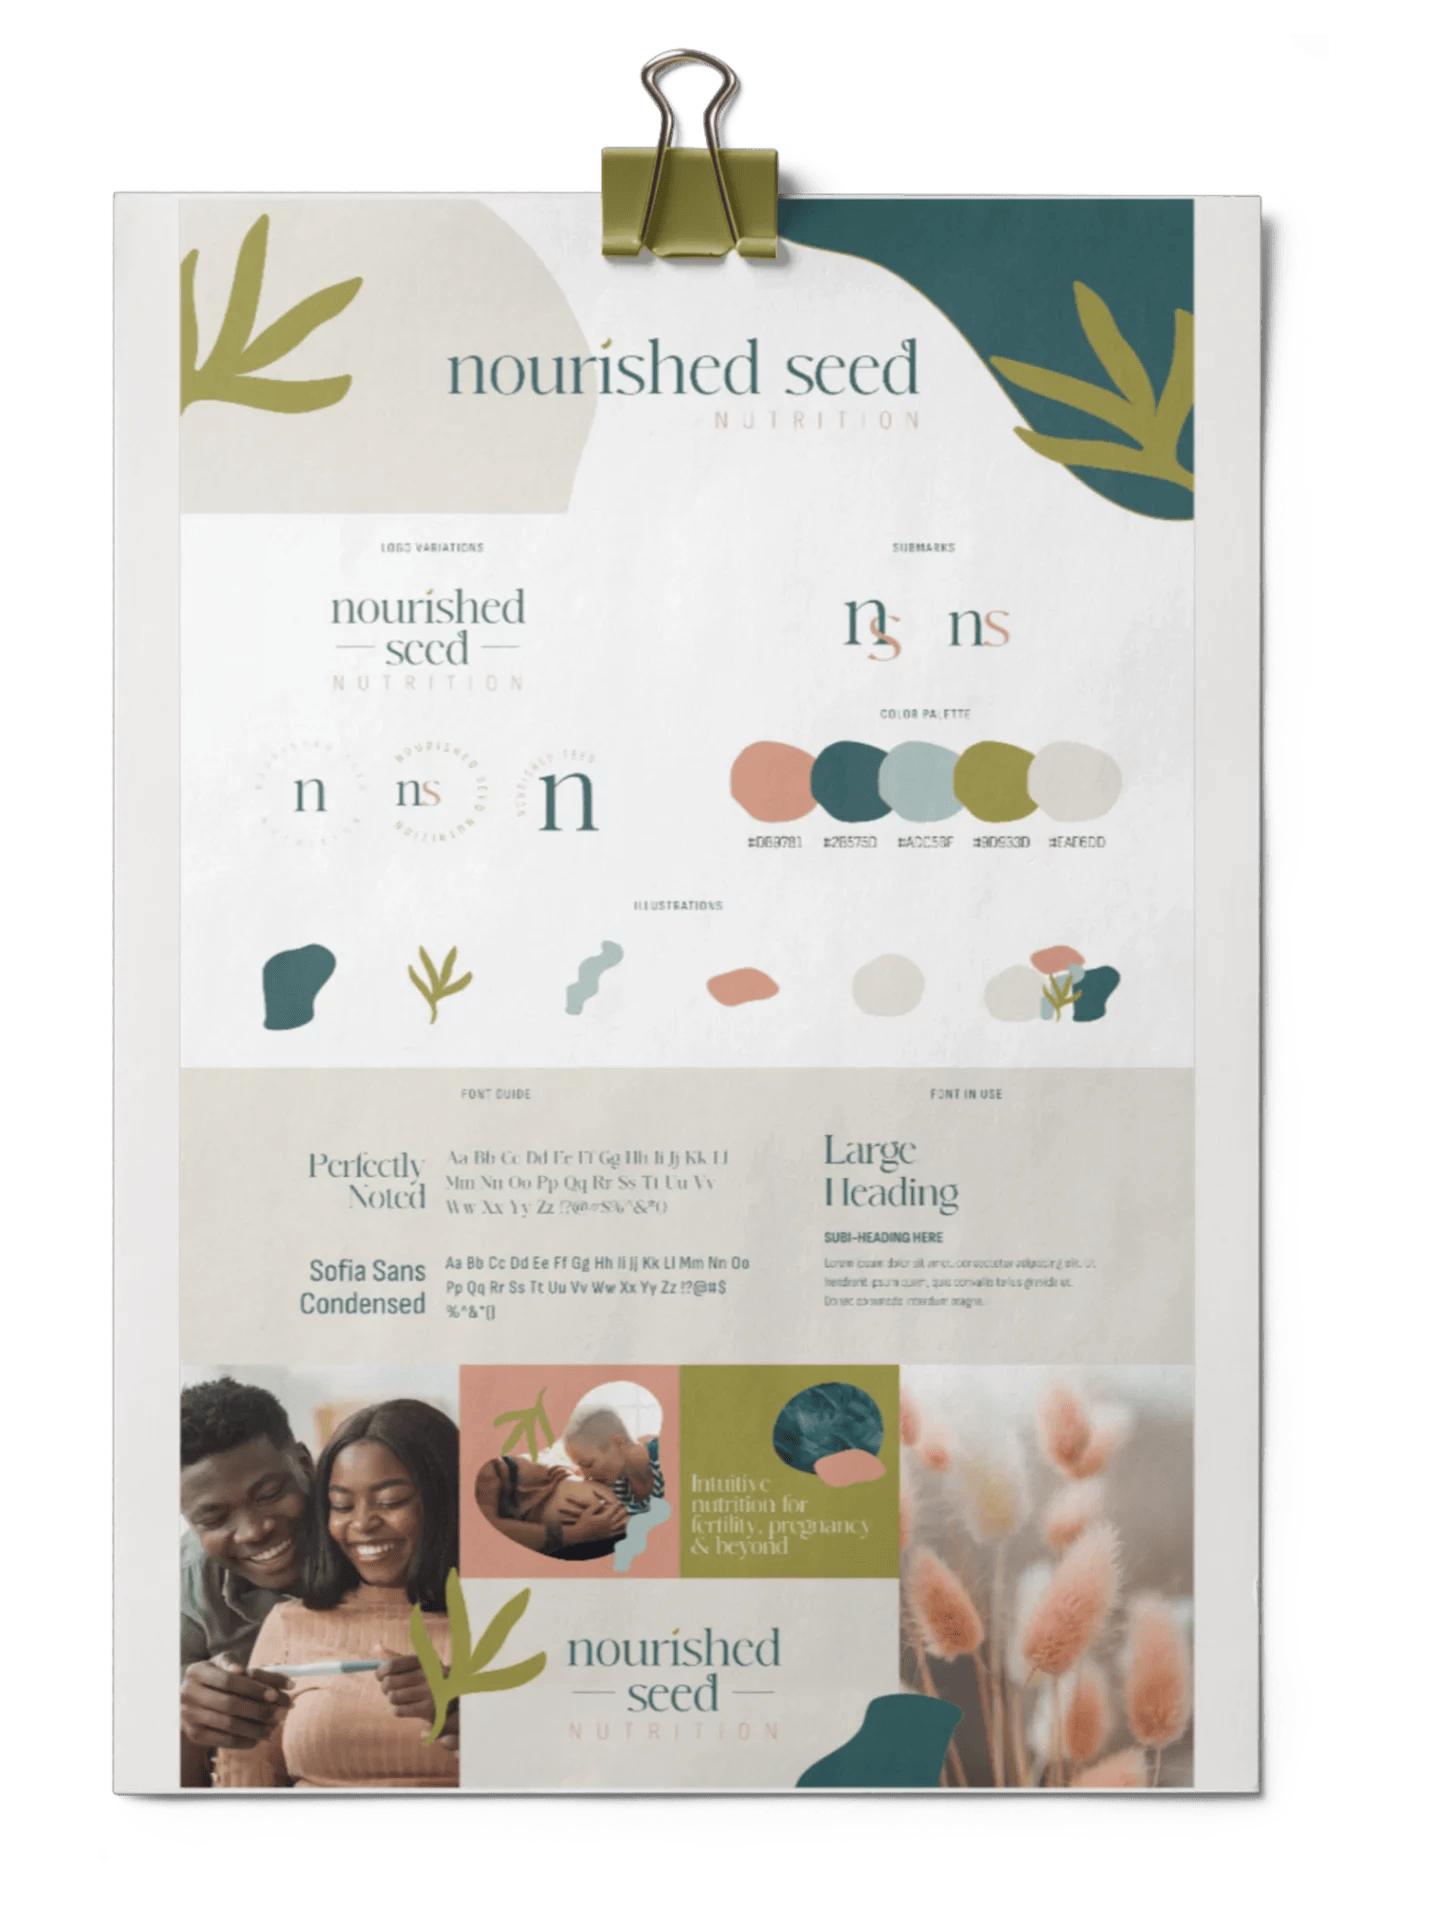 nourished seed nutrition brand